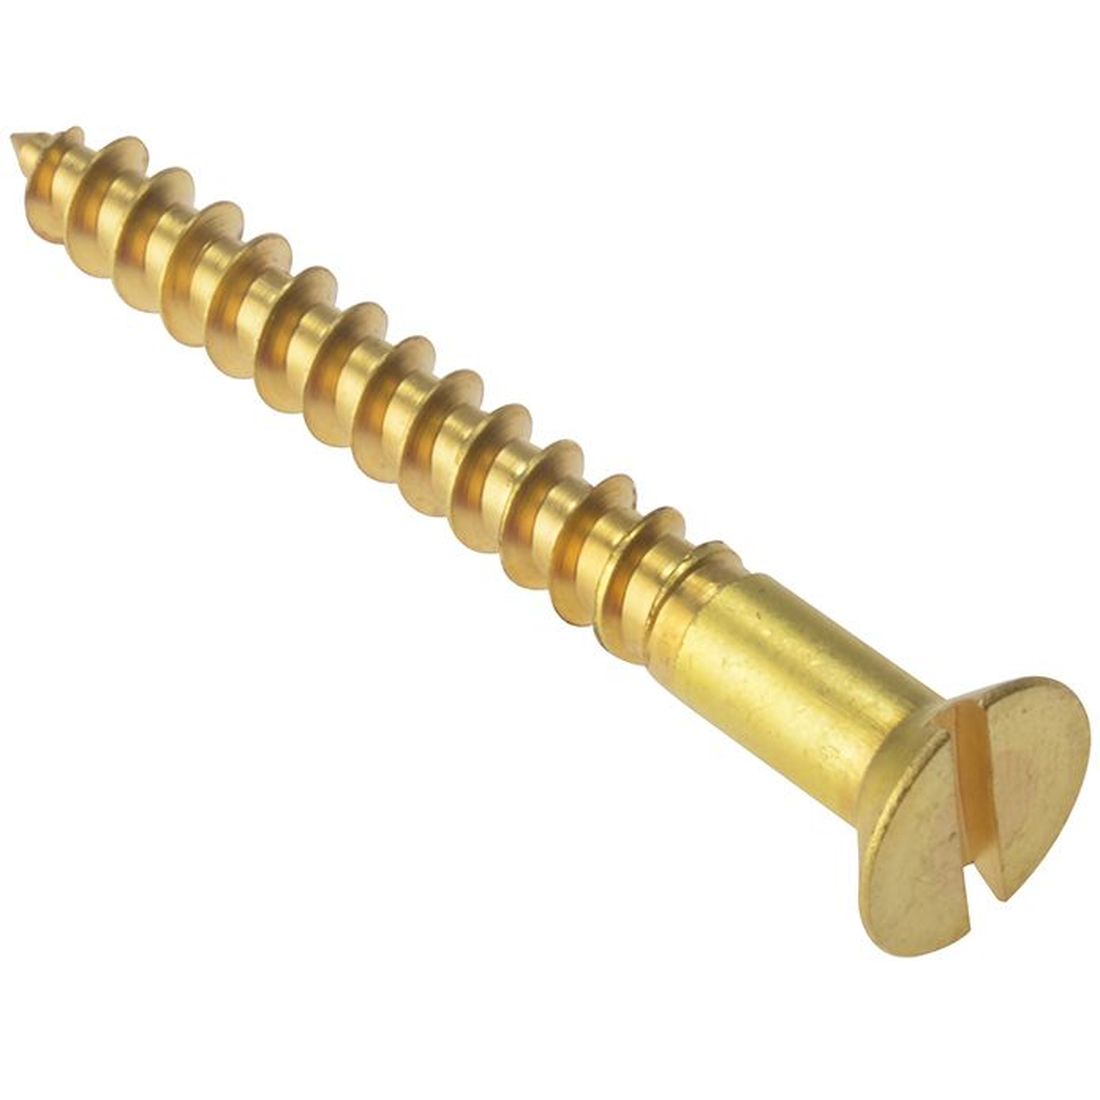 ForgeFix Wood Screw Slotted CSK Solid Brass 2.1/2in x 12 Box 100                         